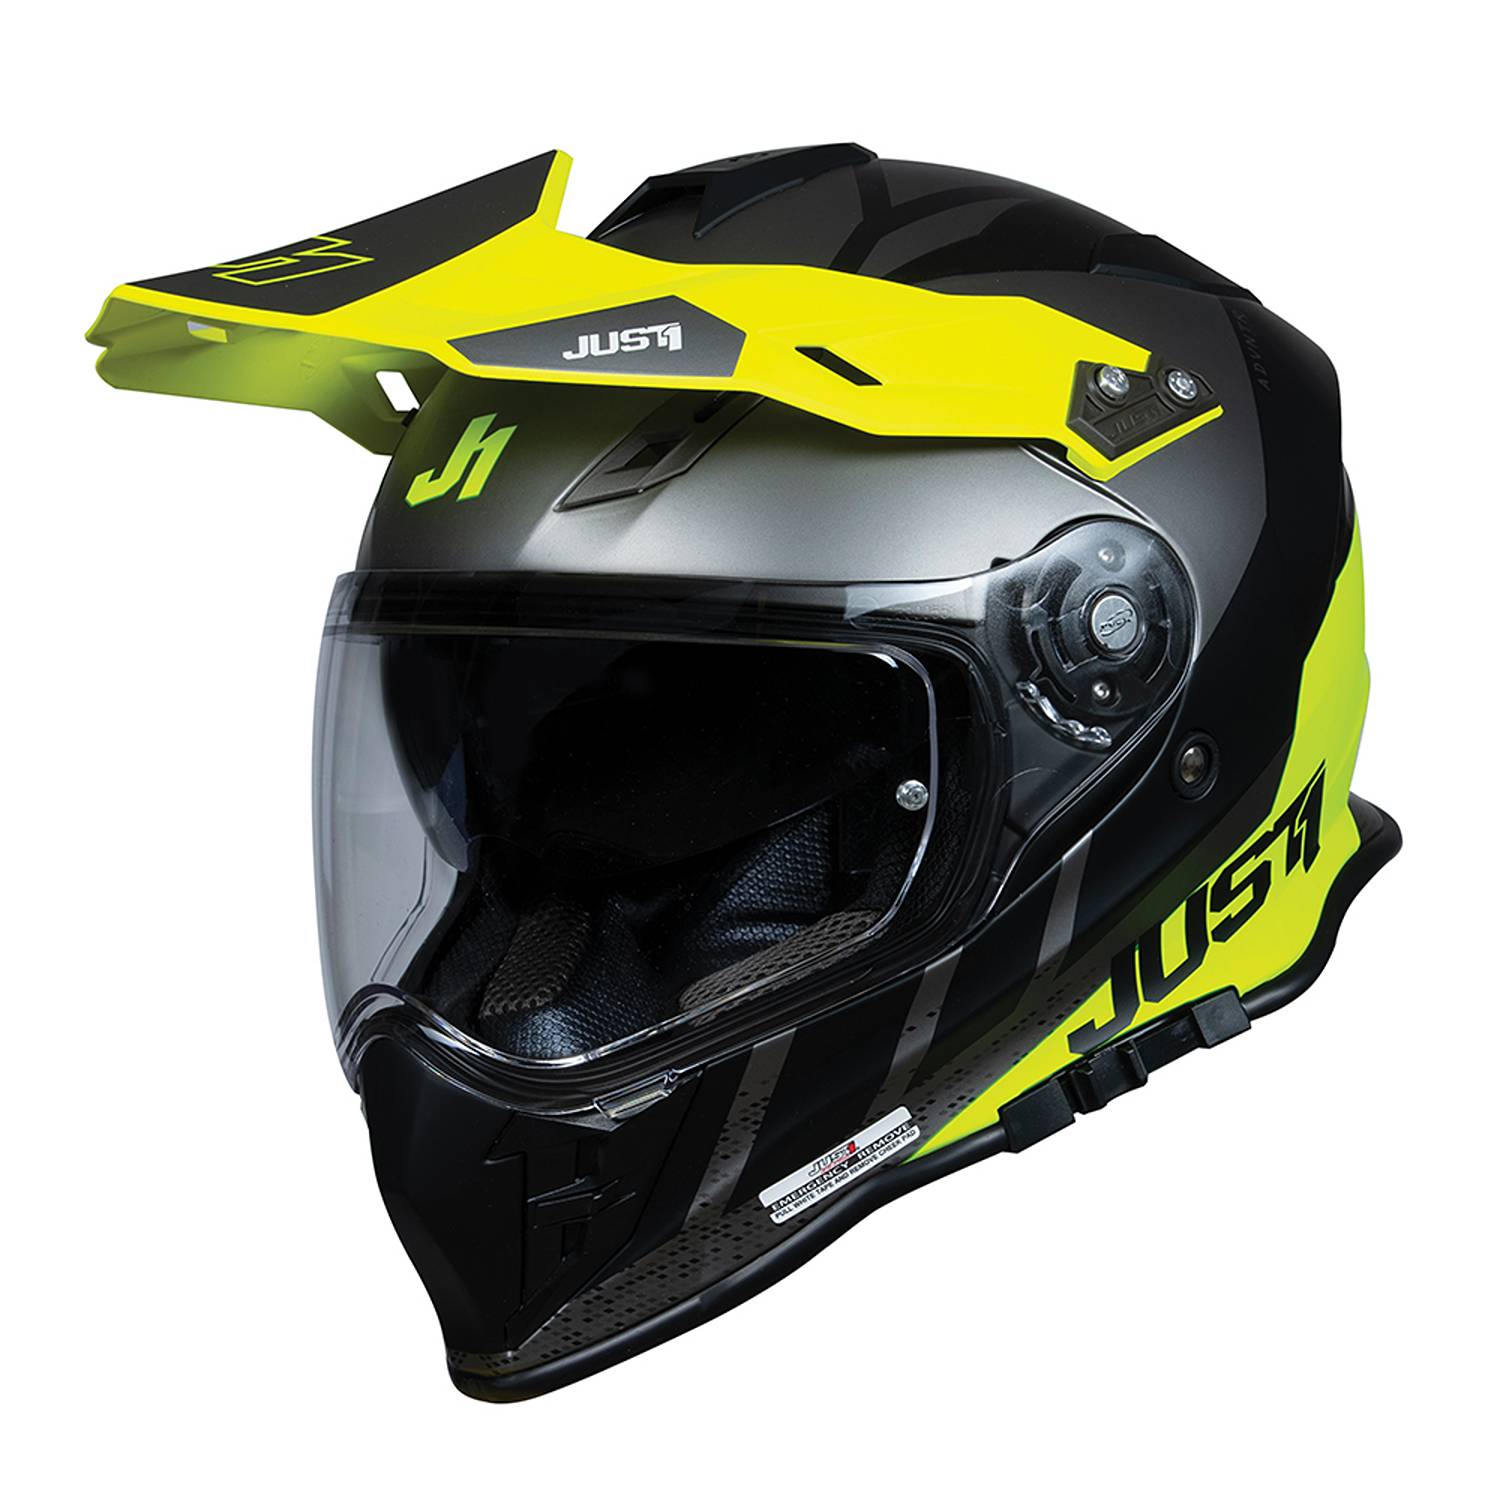 Image of EU Just1 J34 Pro Outerspace Jaune Vert Titane Aventure Casques Taille S